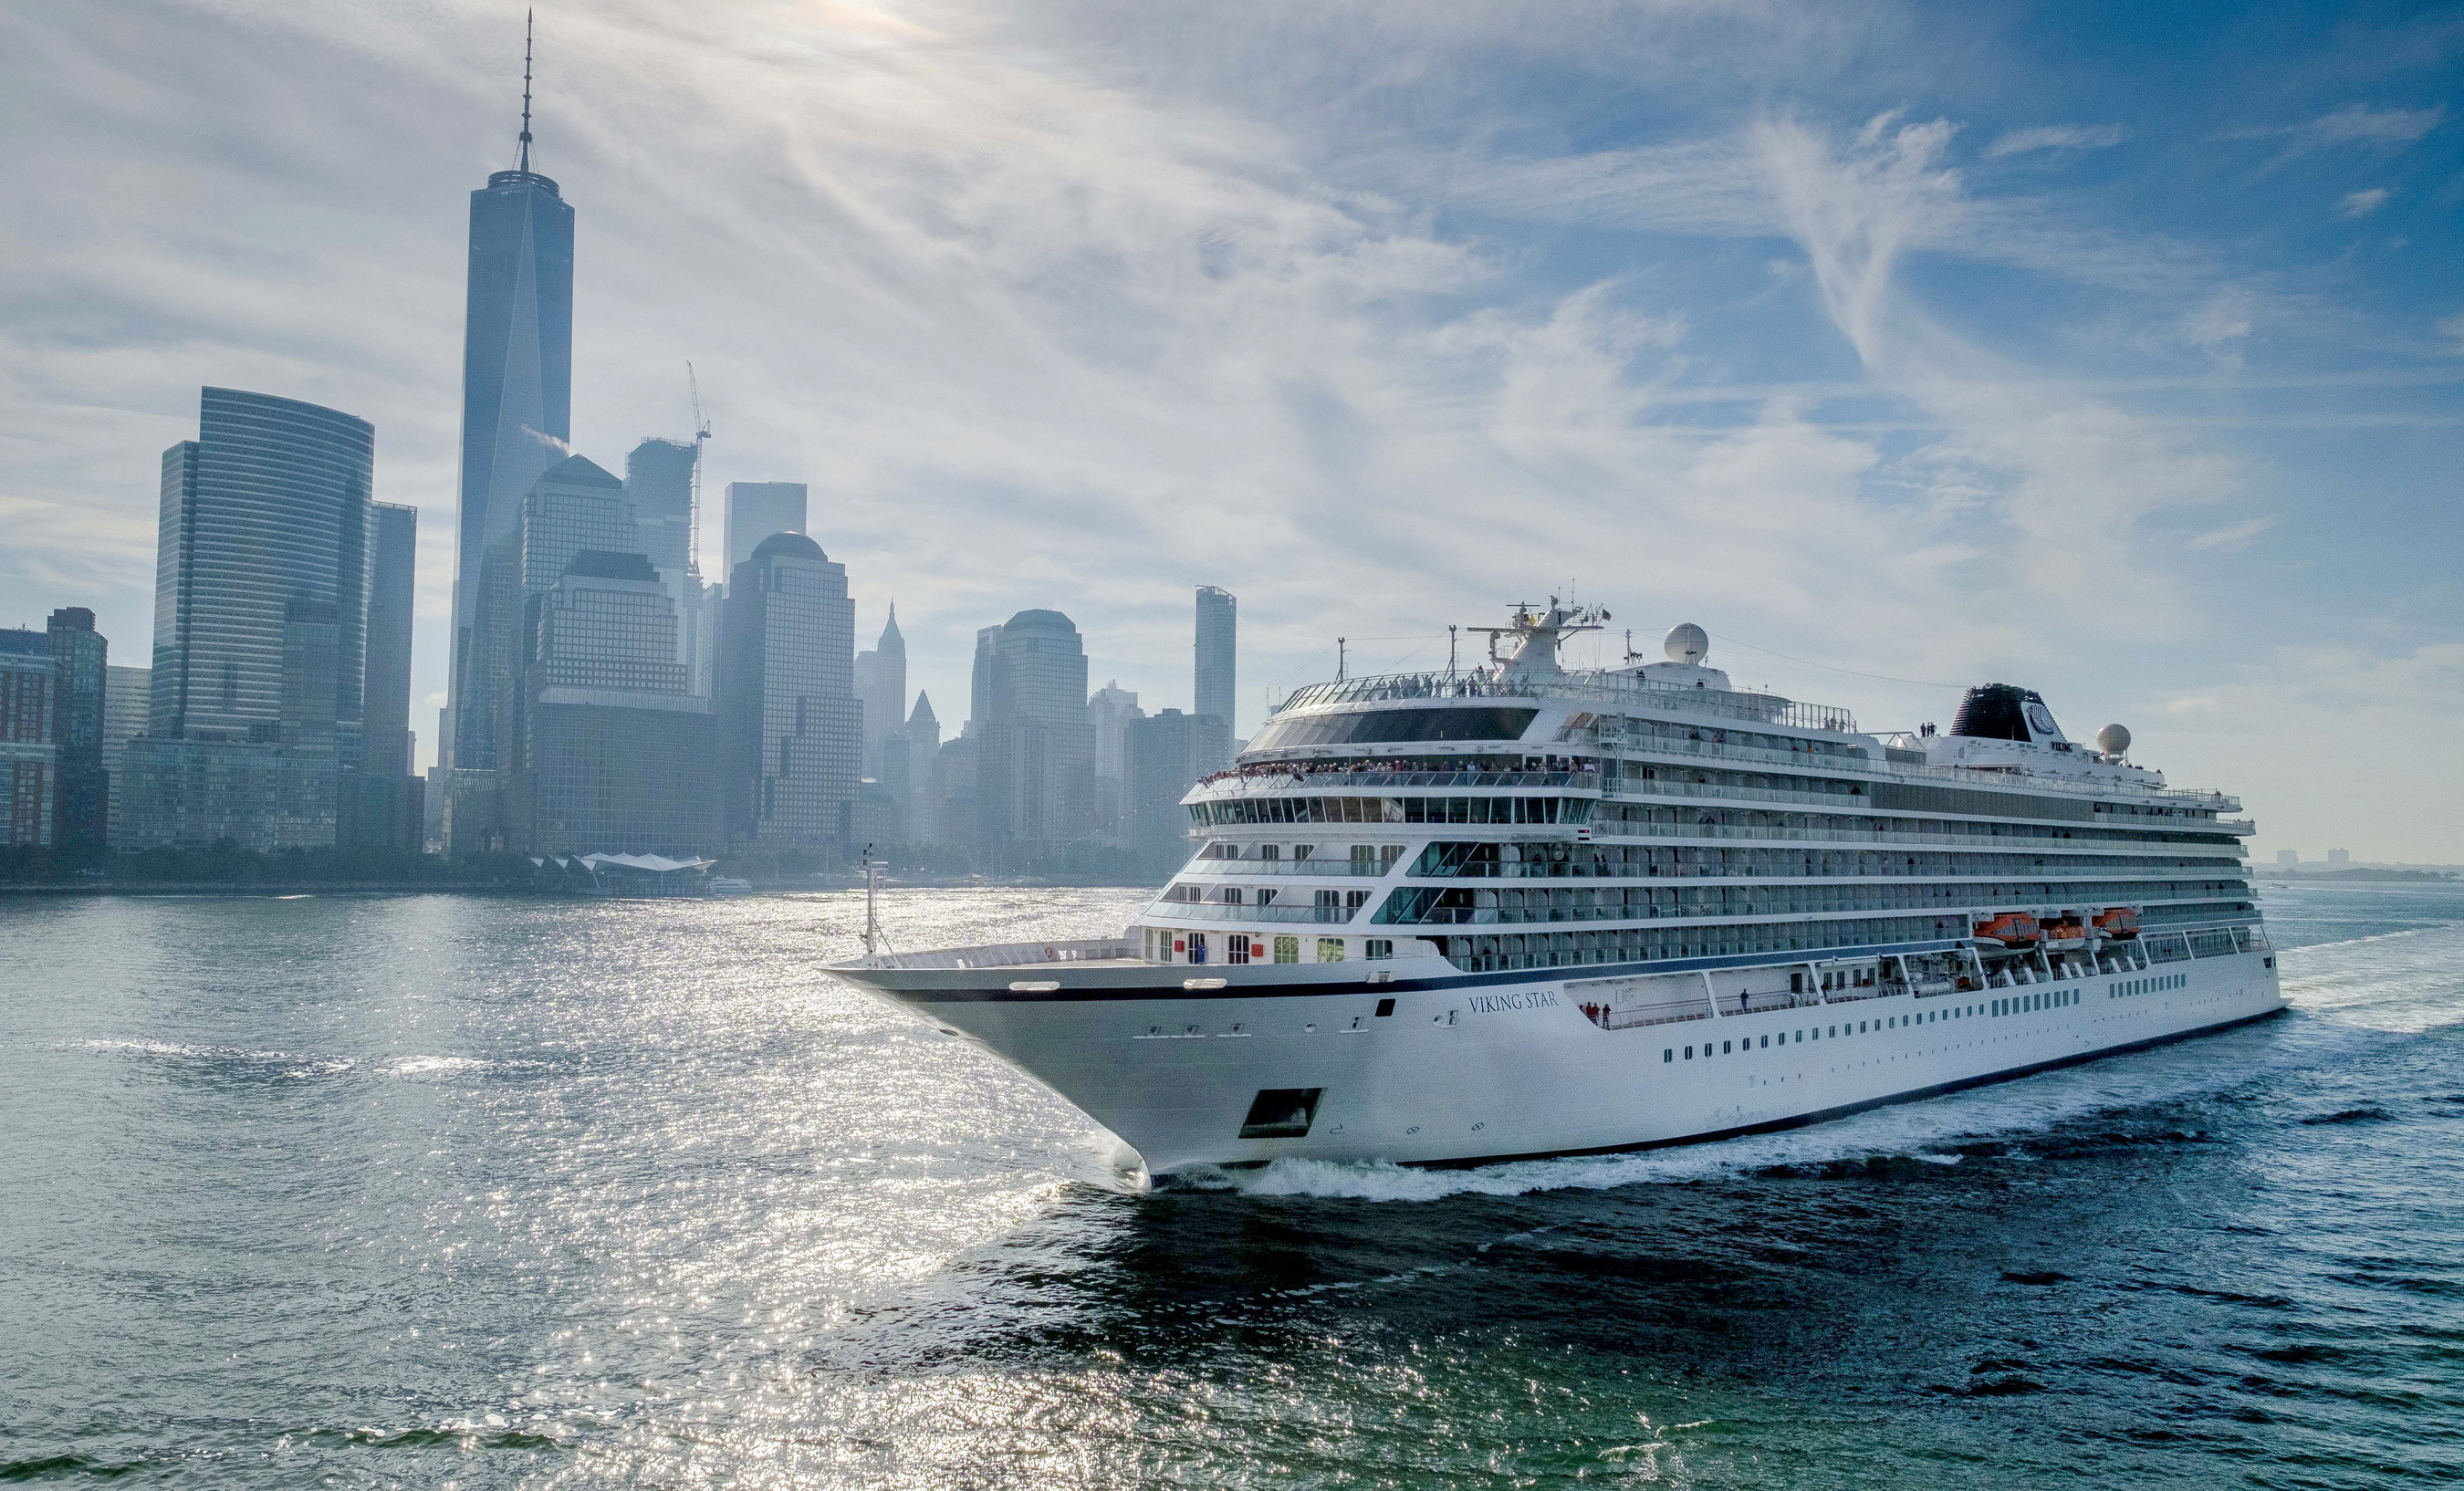 Viking Star, the first 930-passenger ocean ship from Viking Cruises, sails past One World Trade Center in lower Manhattan on Thursday, Oct. 13, 2016 as it calls on New York for the first time. Currently sailing its inaugural North American itinerary, Viking Star will continue onto the Caribbean where it will cruise this winter. For more information, visit www.vikingoceancruises.com.